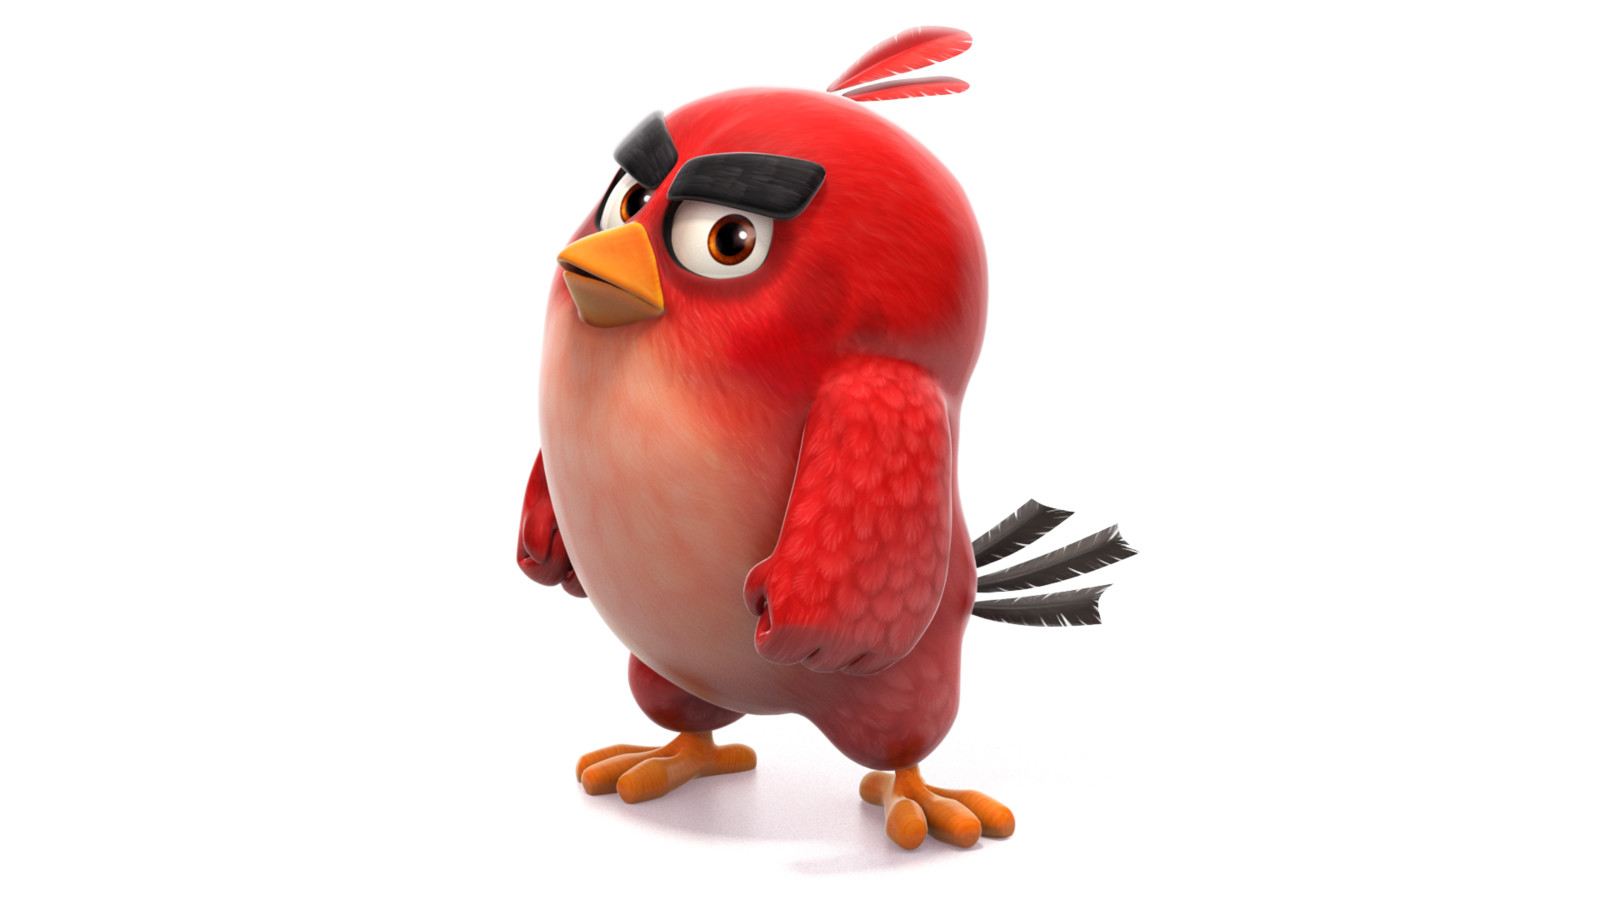 Promo Character Render. Angry Birds Action! Character texture, pose, lighting and render created by myself.